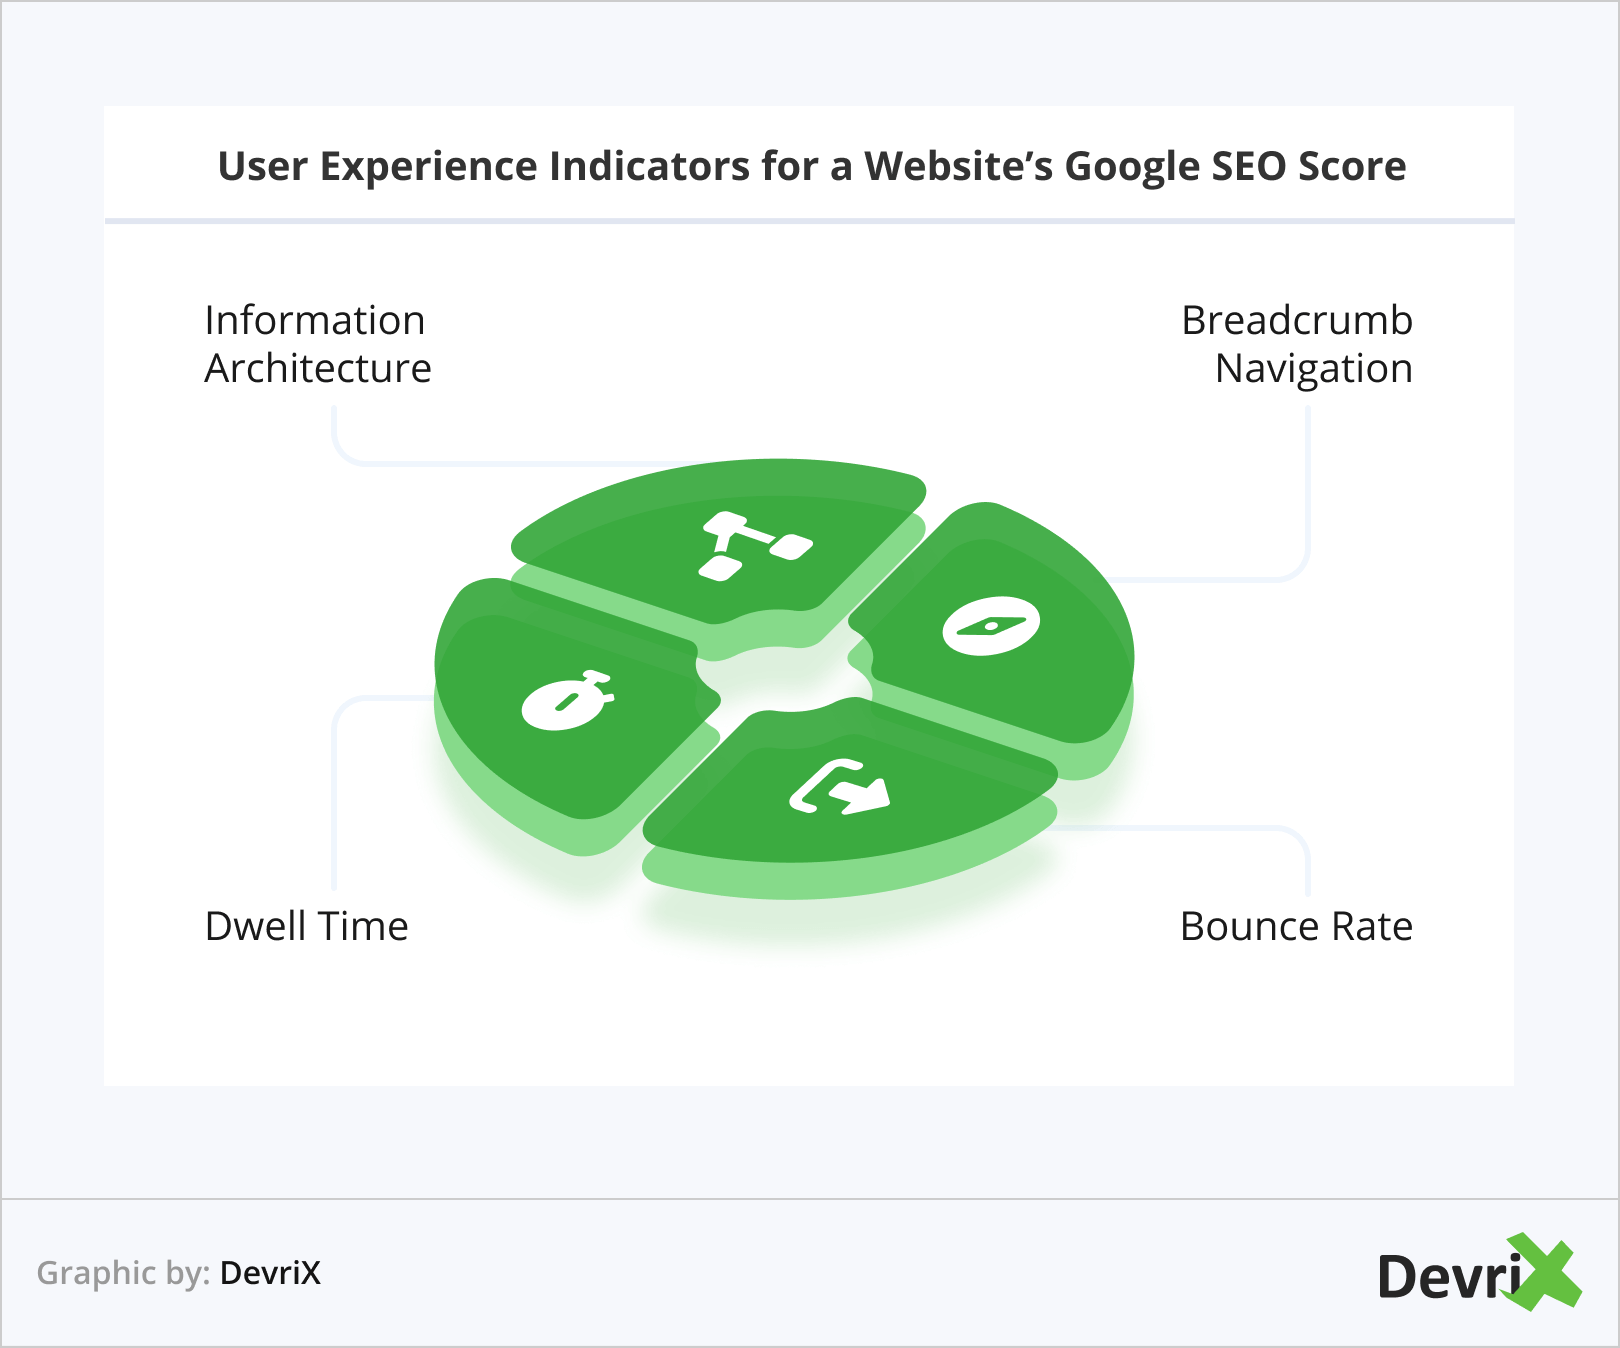 User Experience Indicators for a Website’s Google SEO Score